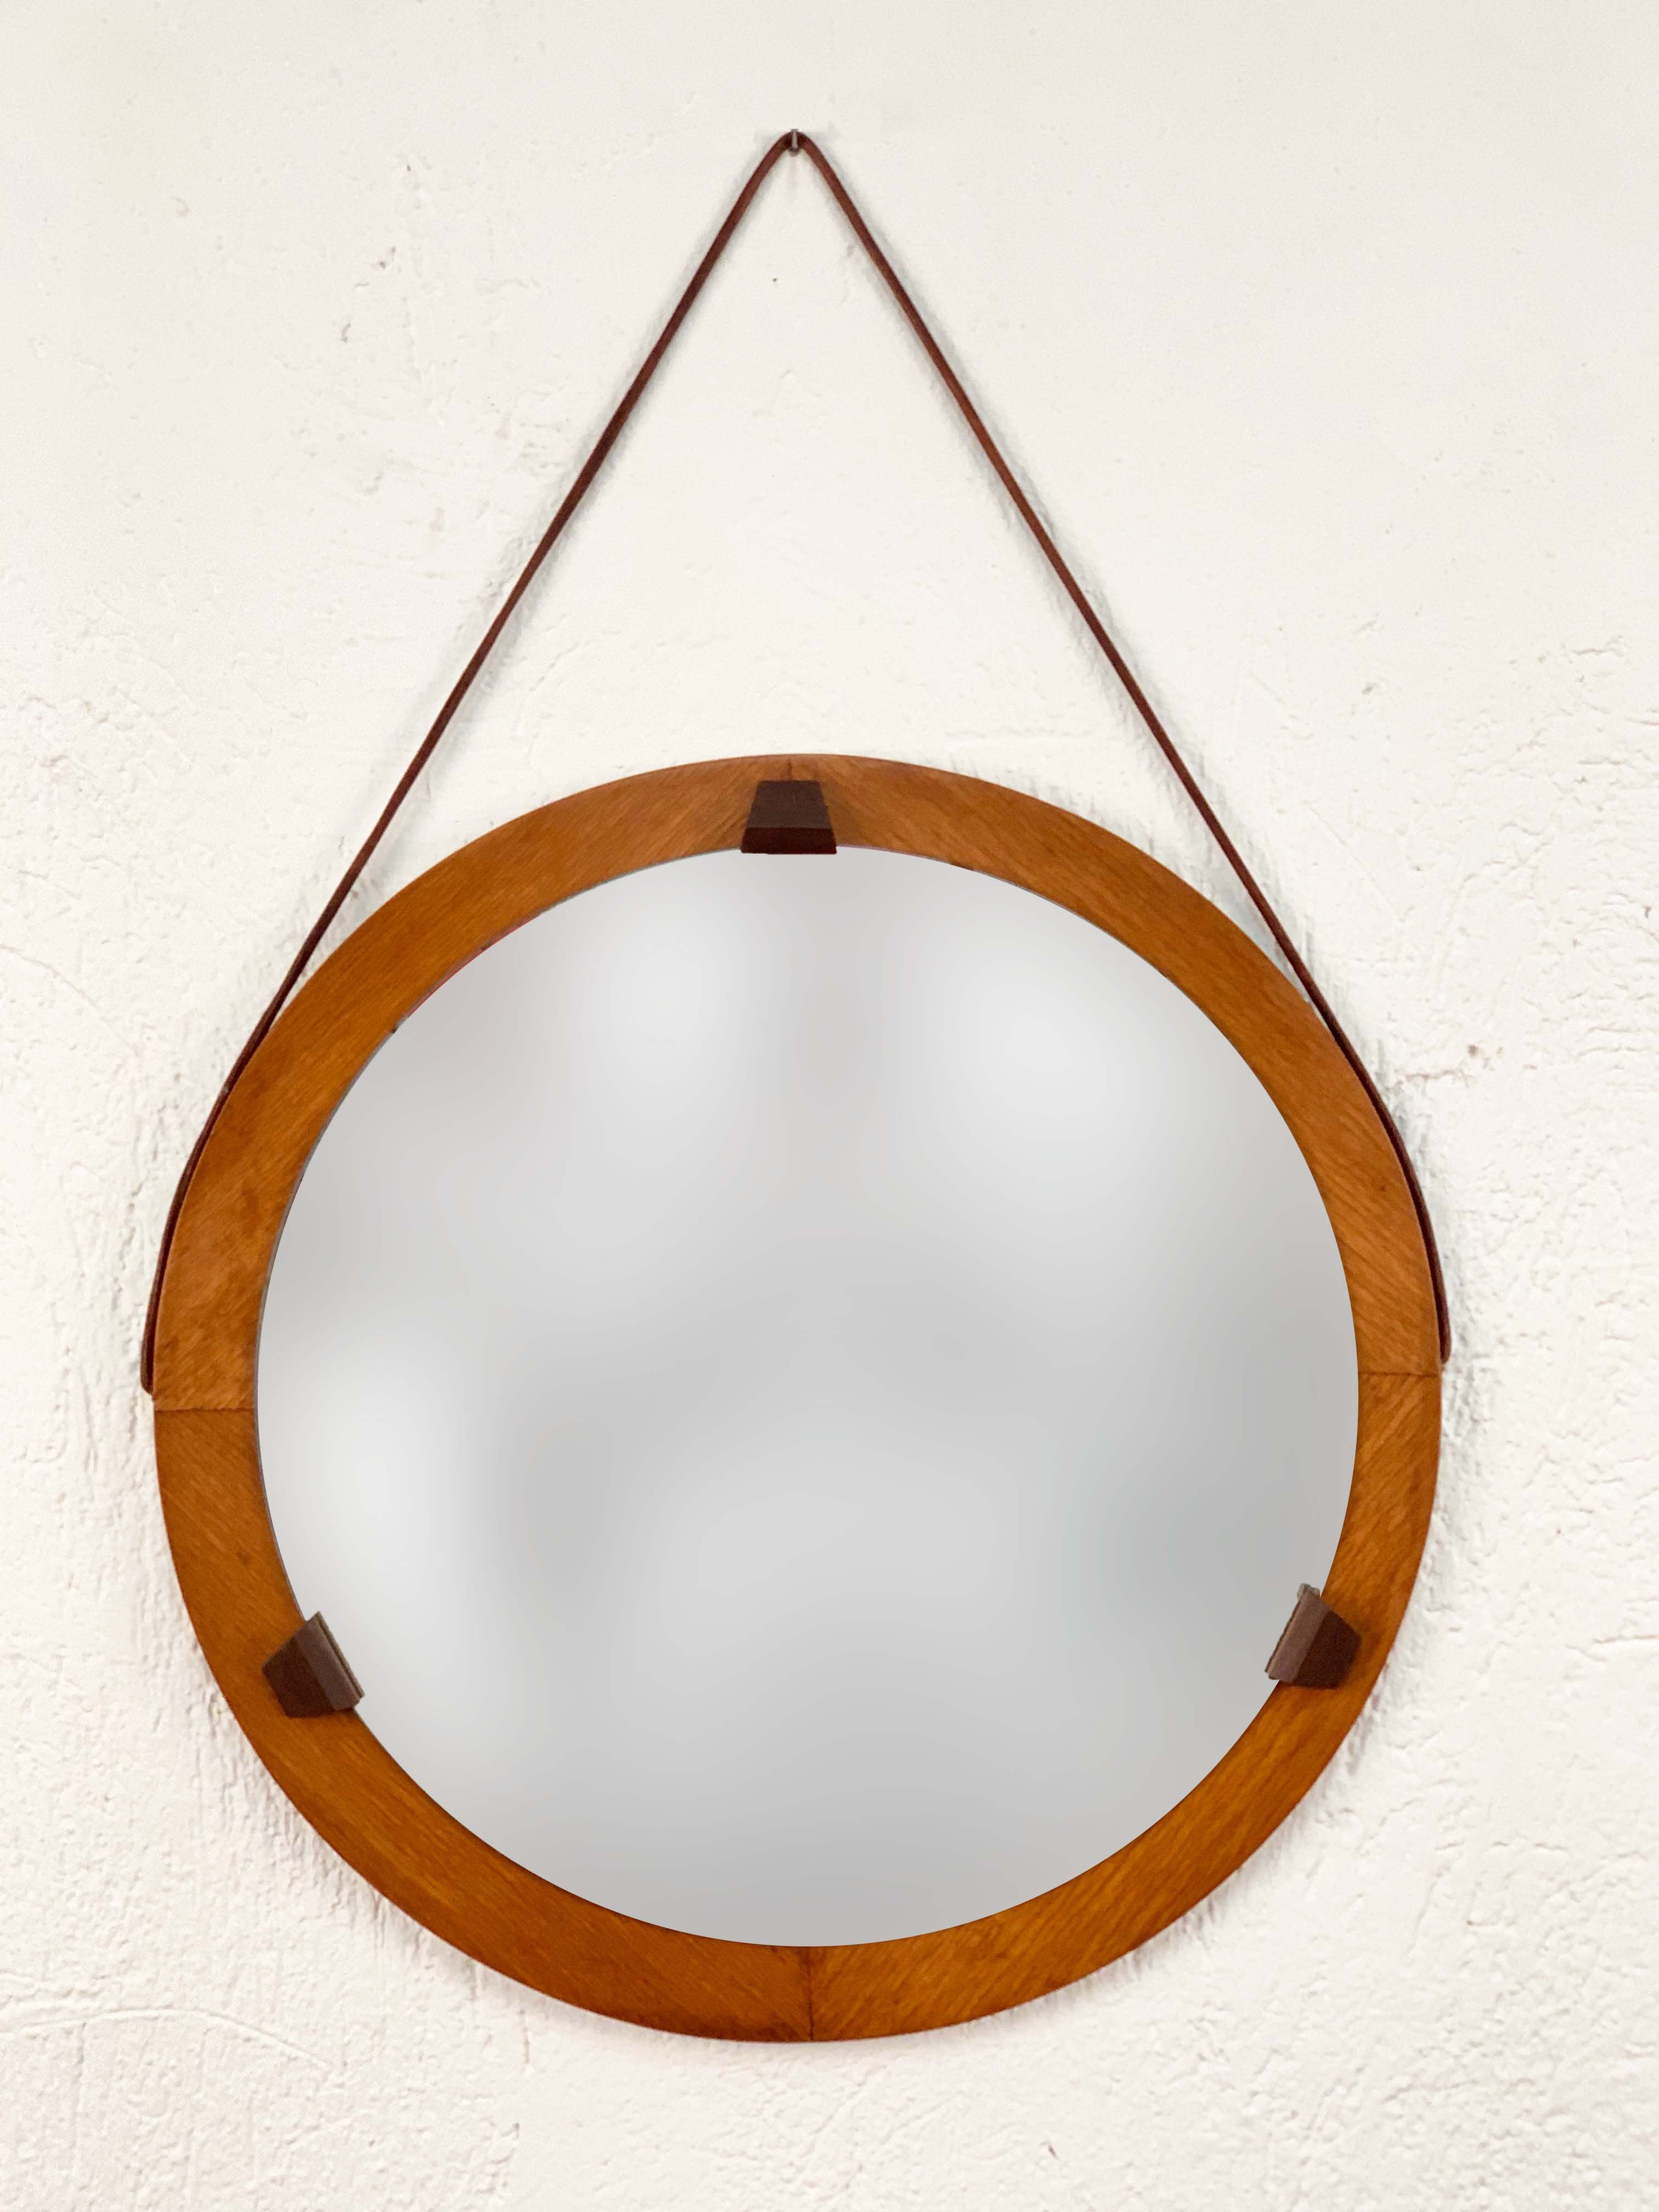 Leather Framed Wall Mirrors Throughout Most Current Round Teak Framed Mirror, Italian Wall Mirror And Leather, Italy, 1960s (View 12 of 20)